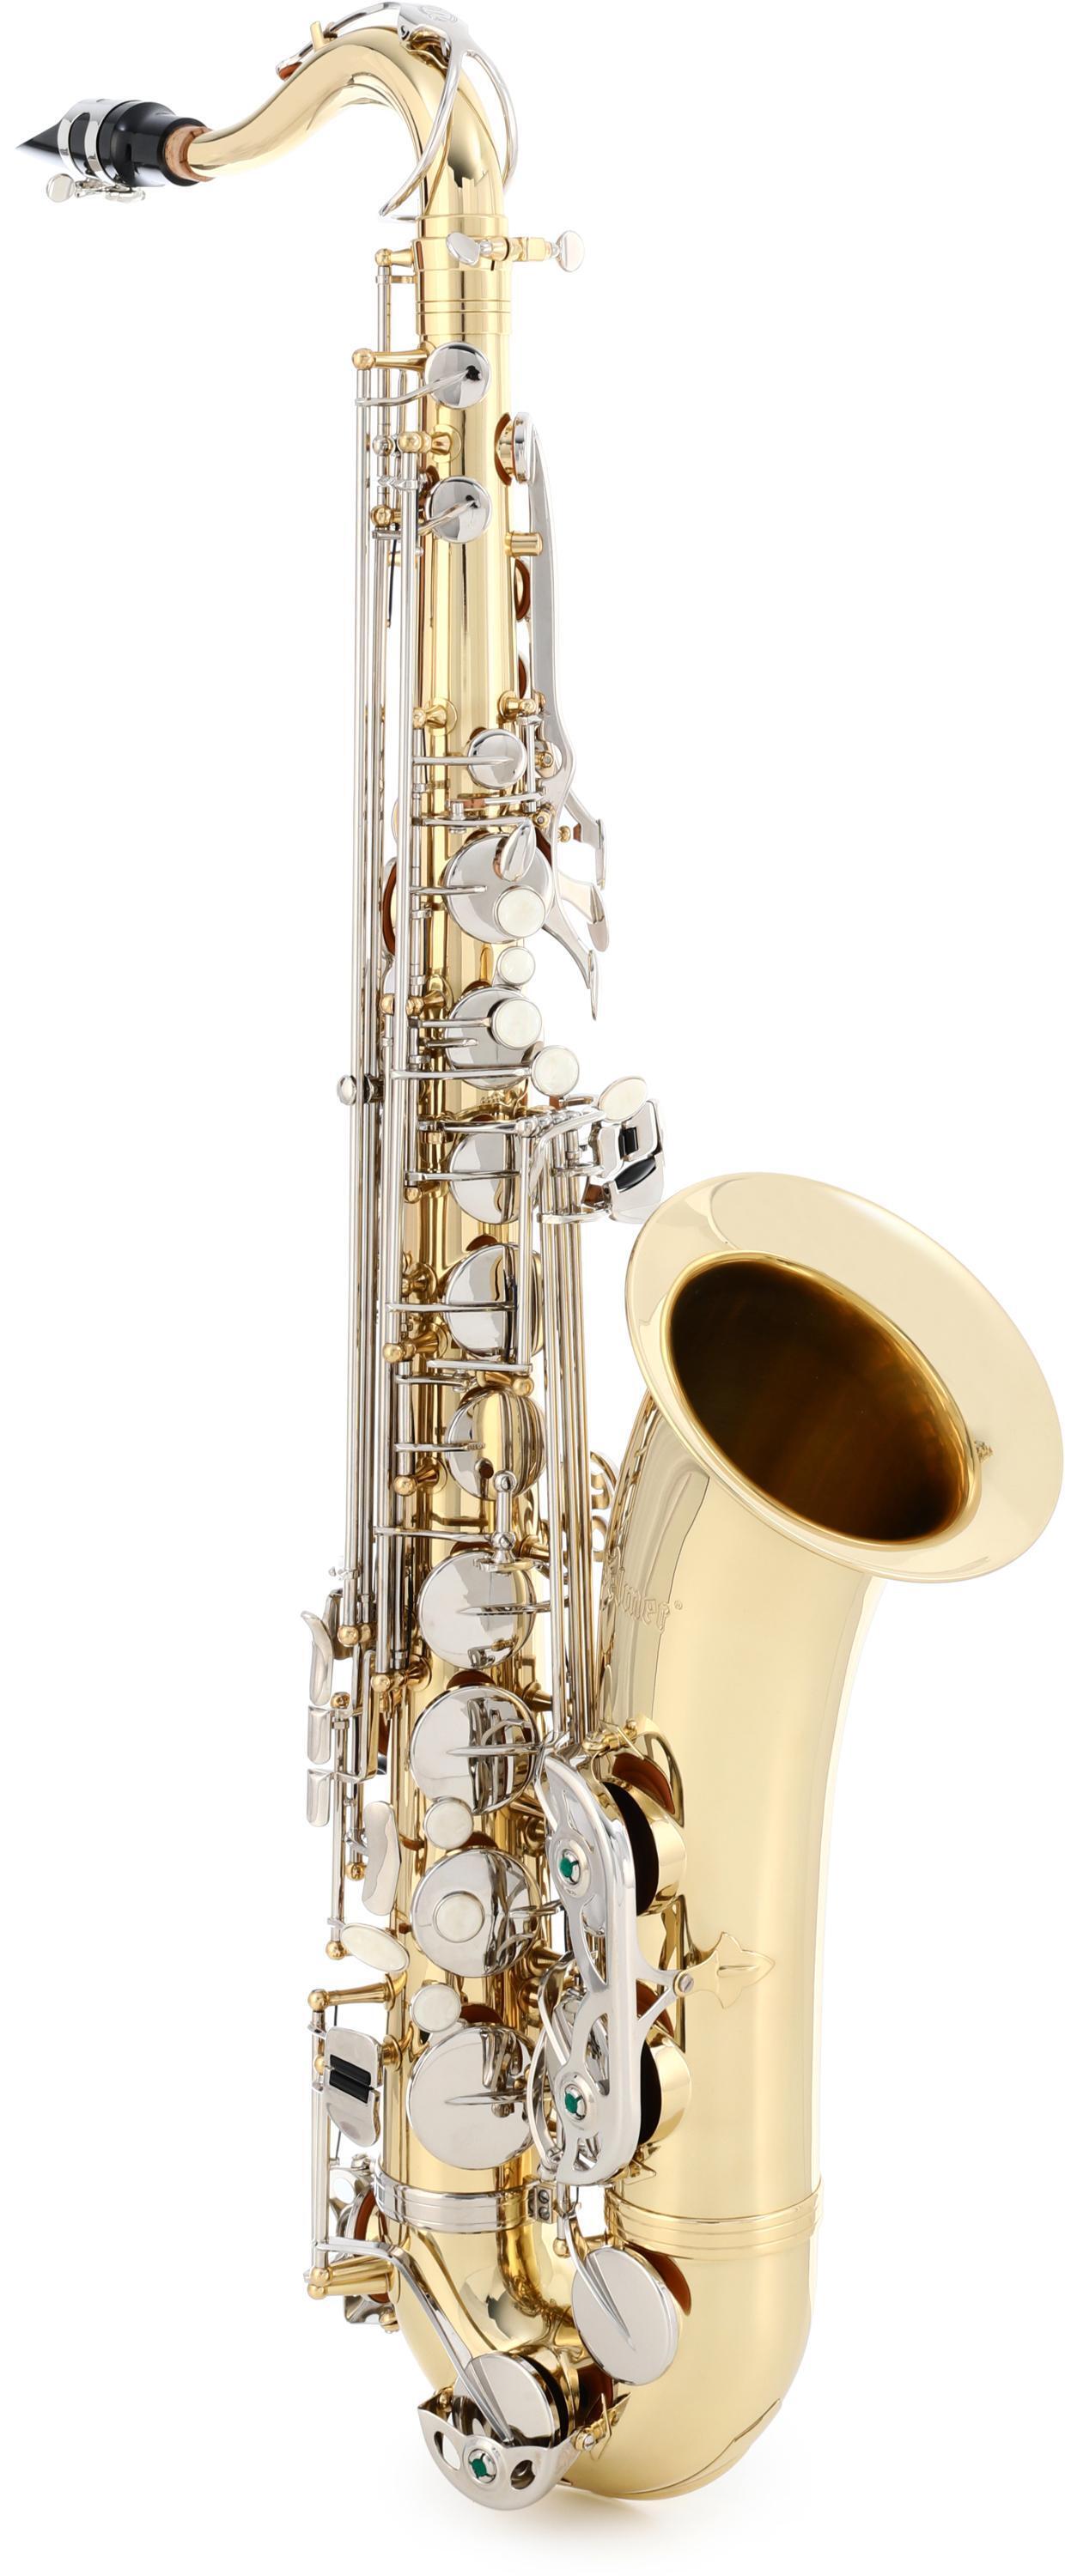 Mini Sax - Stainless Steel — Mini Sax - Easy to Pick Up and Play